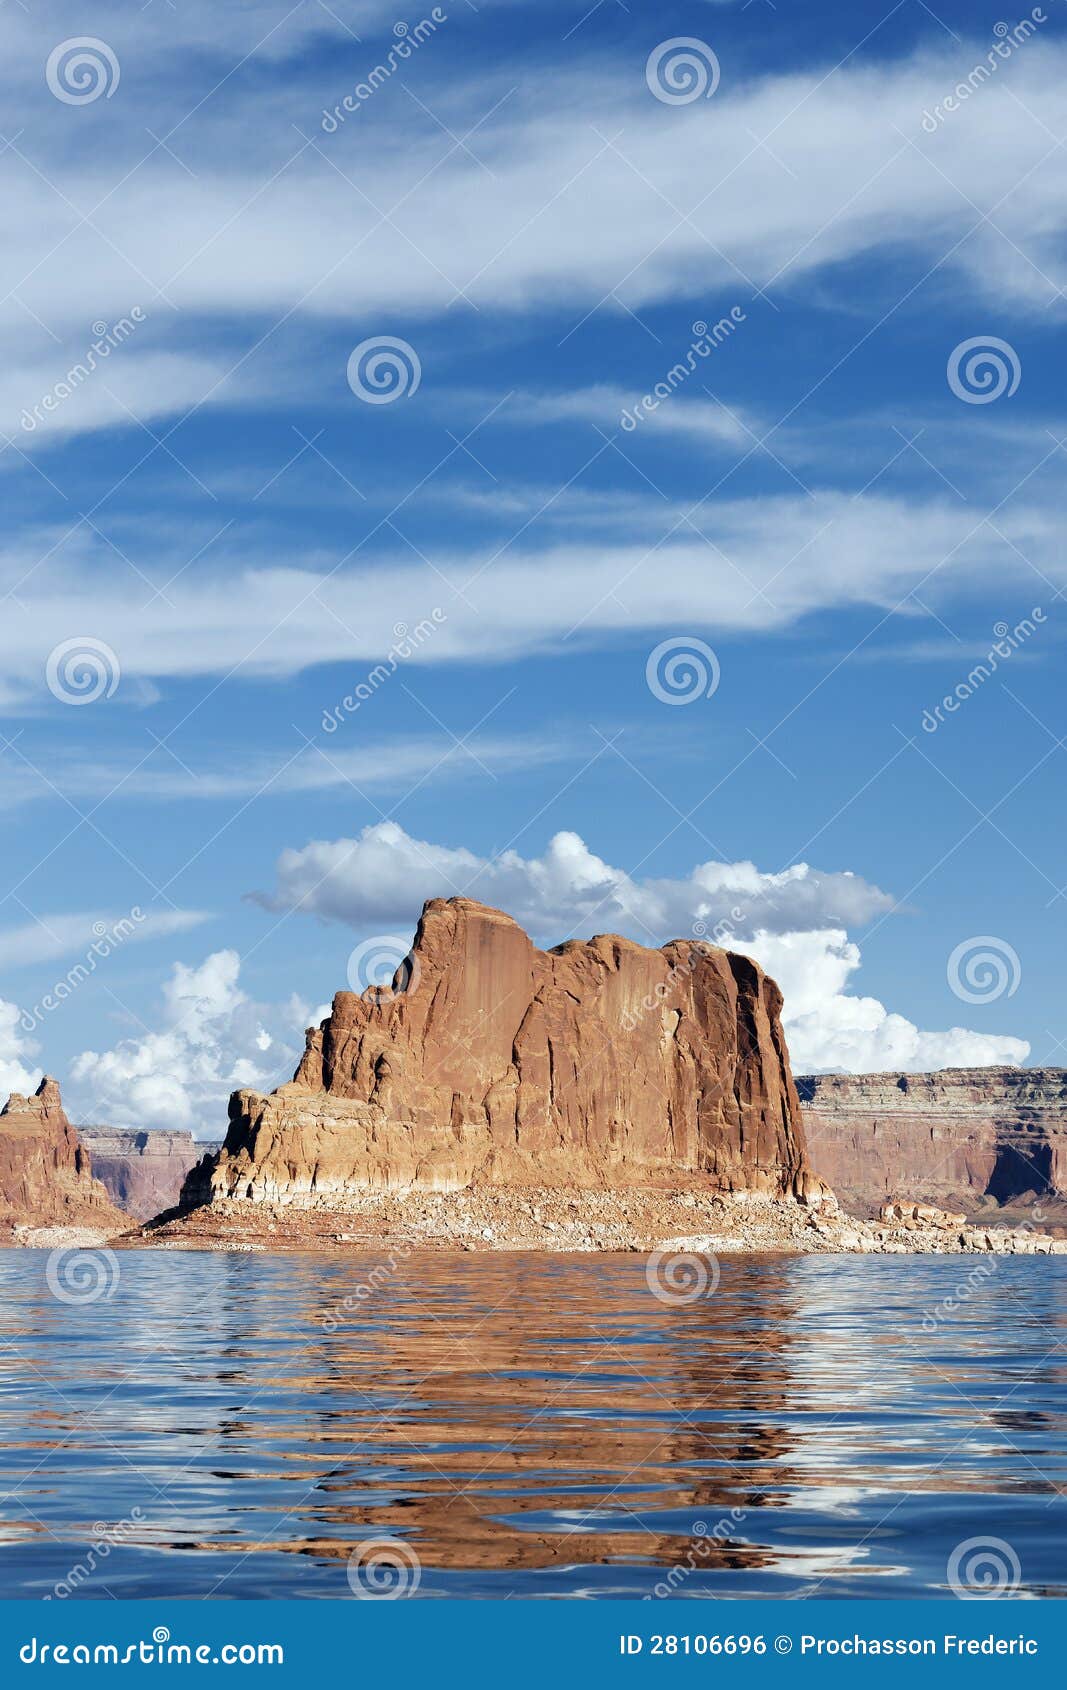 cliffs of lake powell